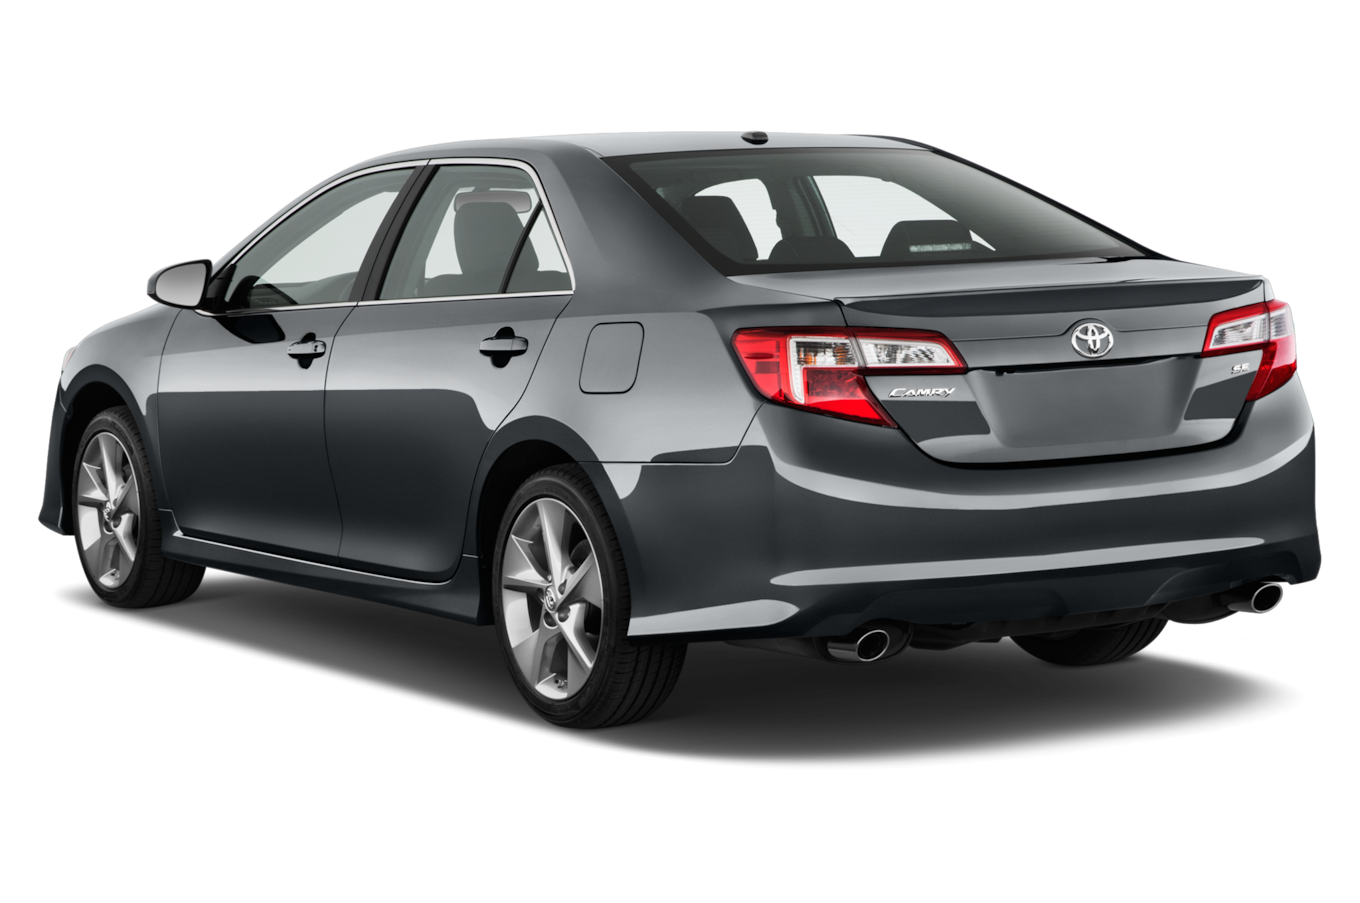 2014 toyota camry se review